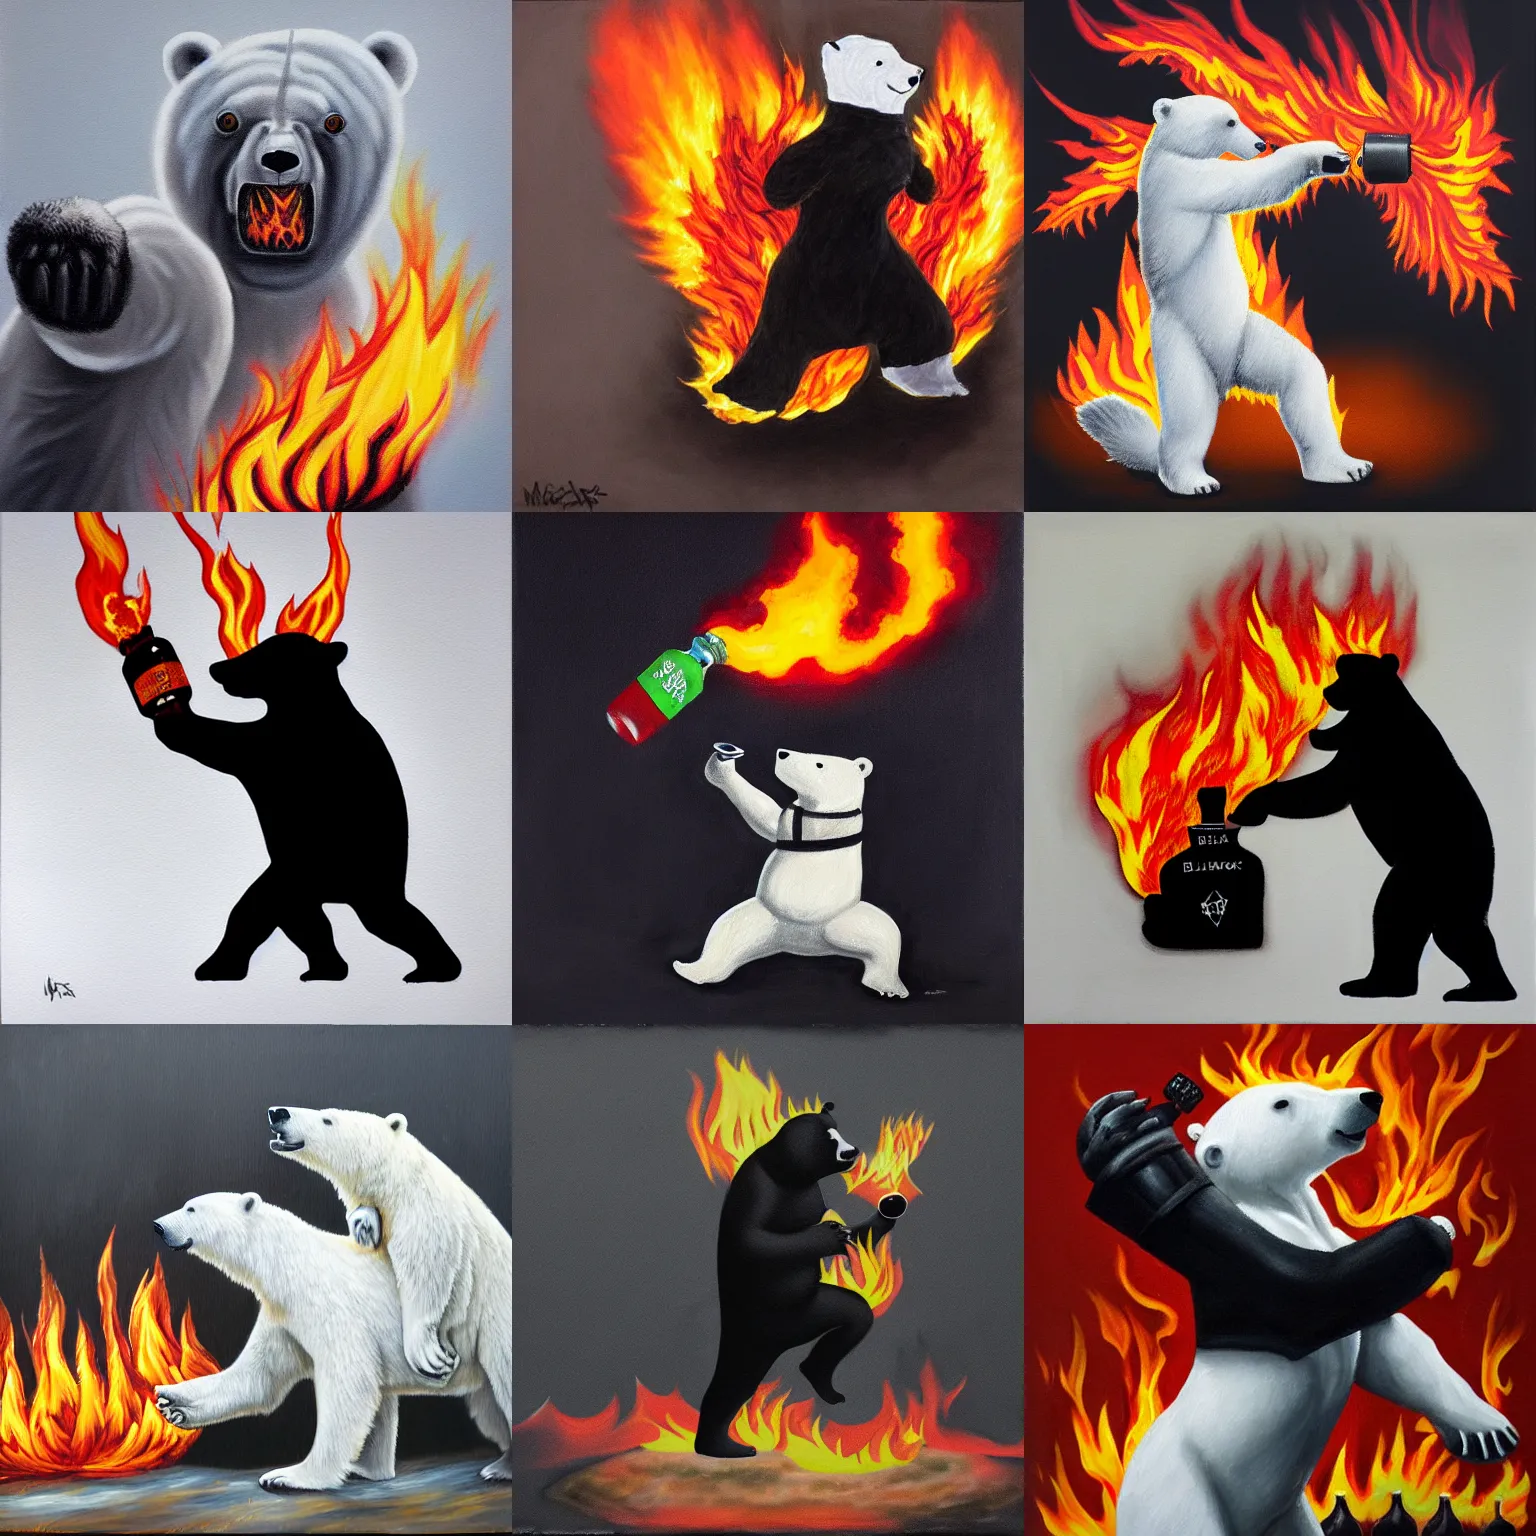 Prompt: polar bear wearing black bloc throwing a flaming bottle, photorealistic painting